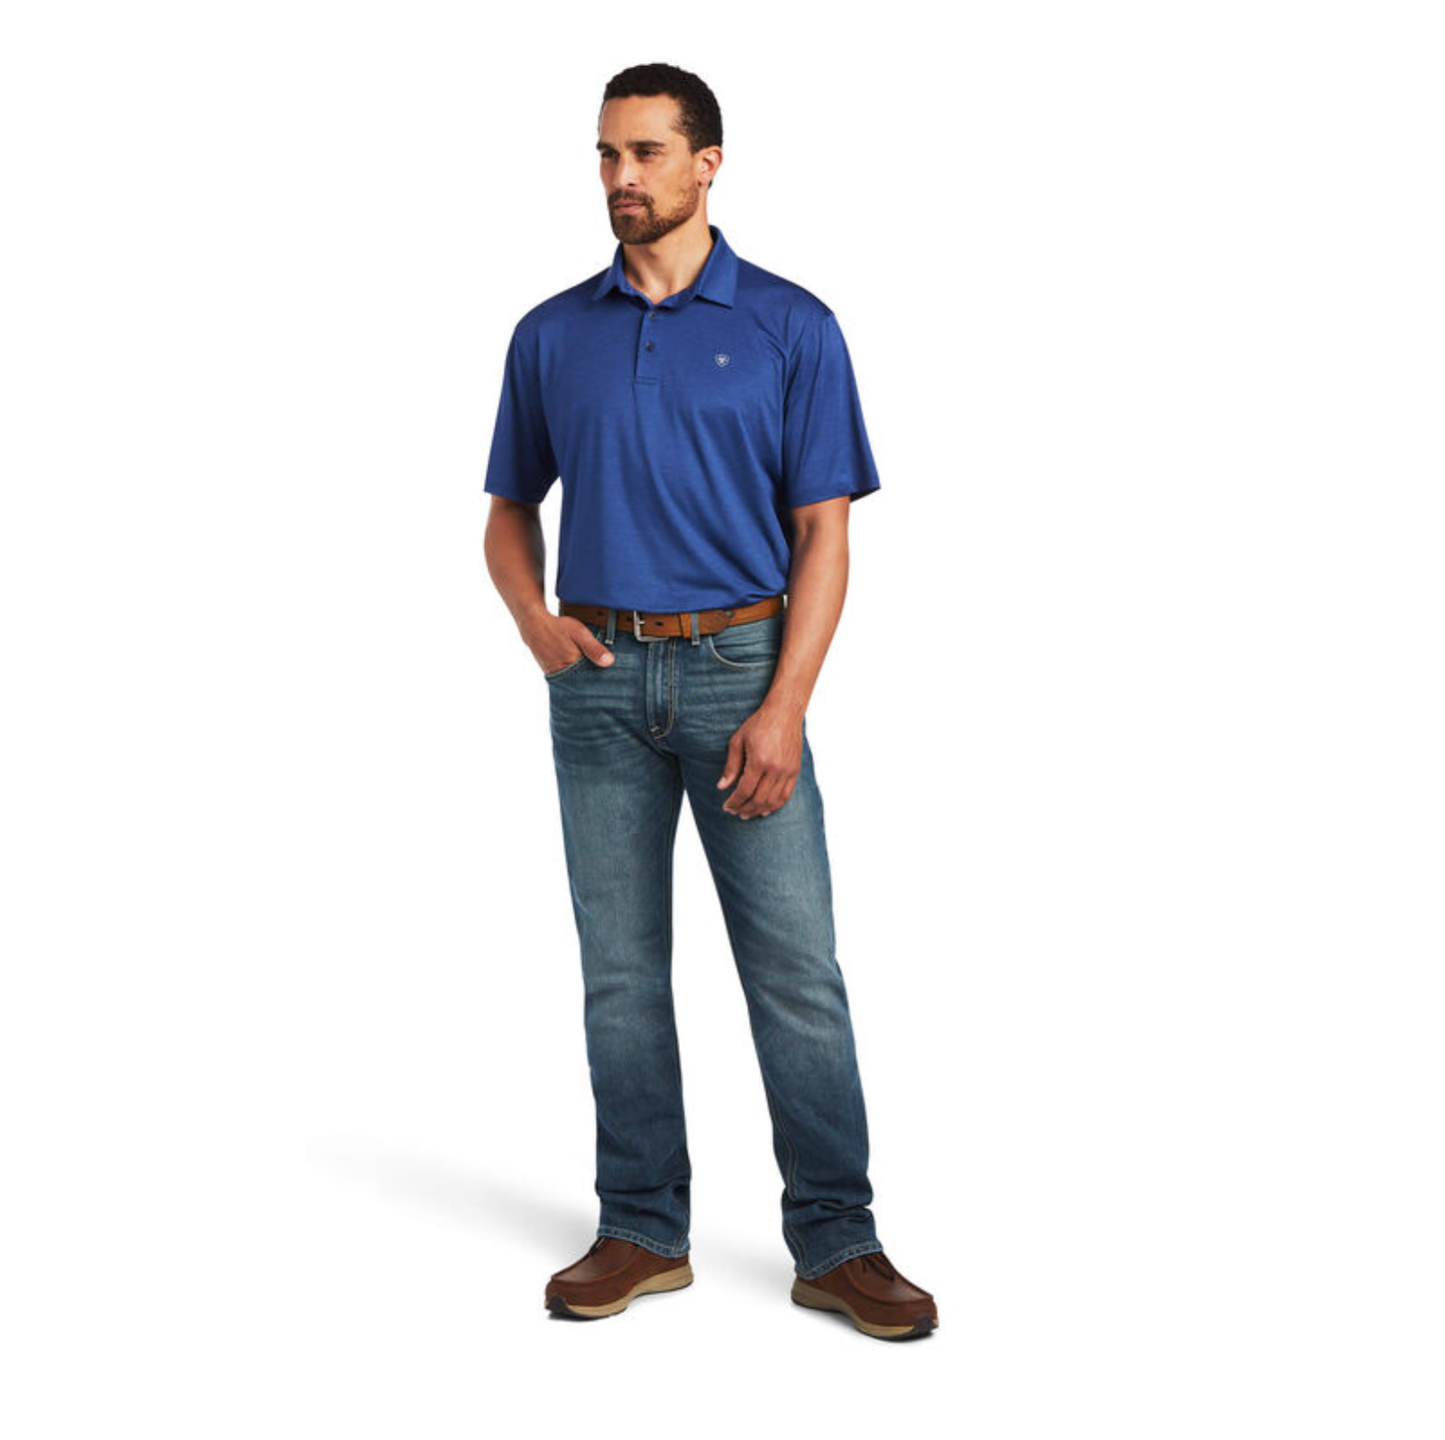 Ariat® Men's Charger 2.0 Nocturnal Blue Polo Shirt 10040592